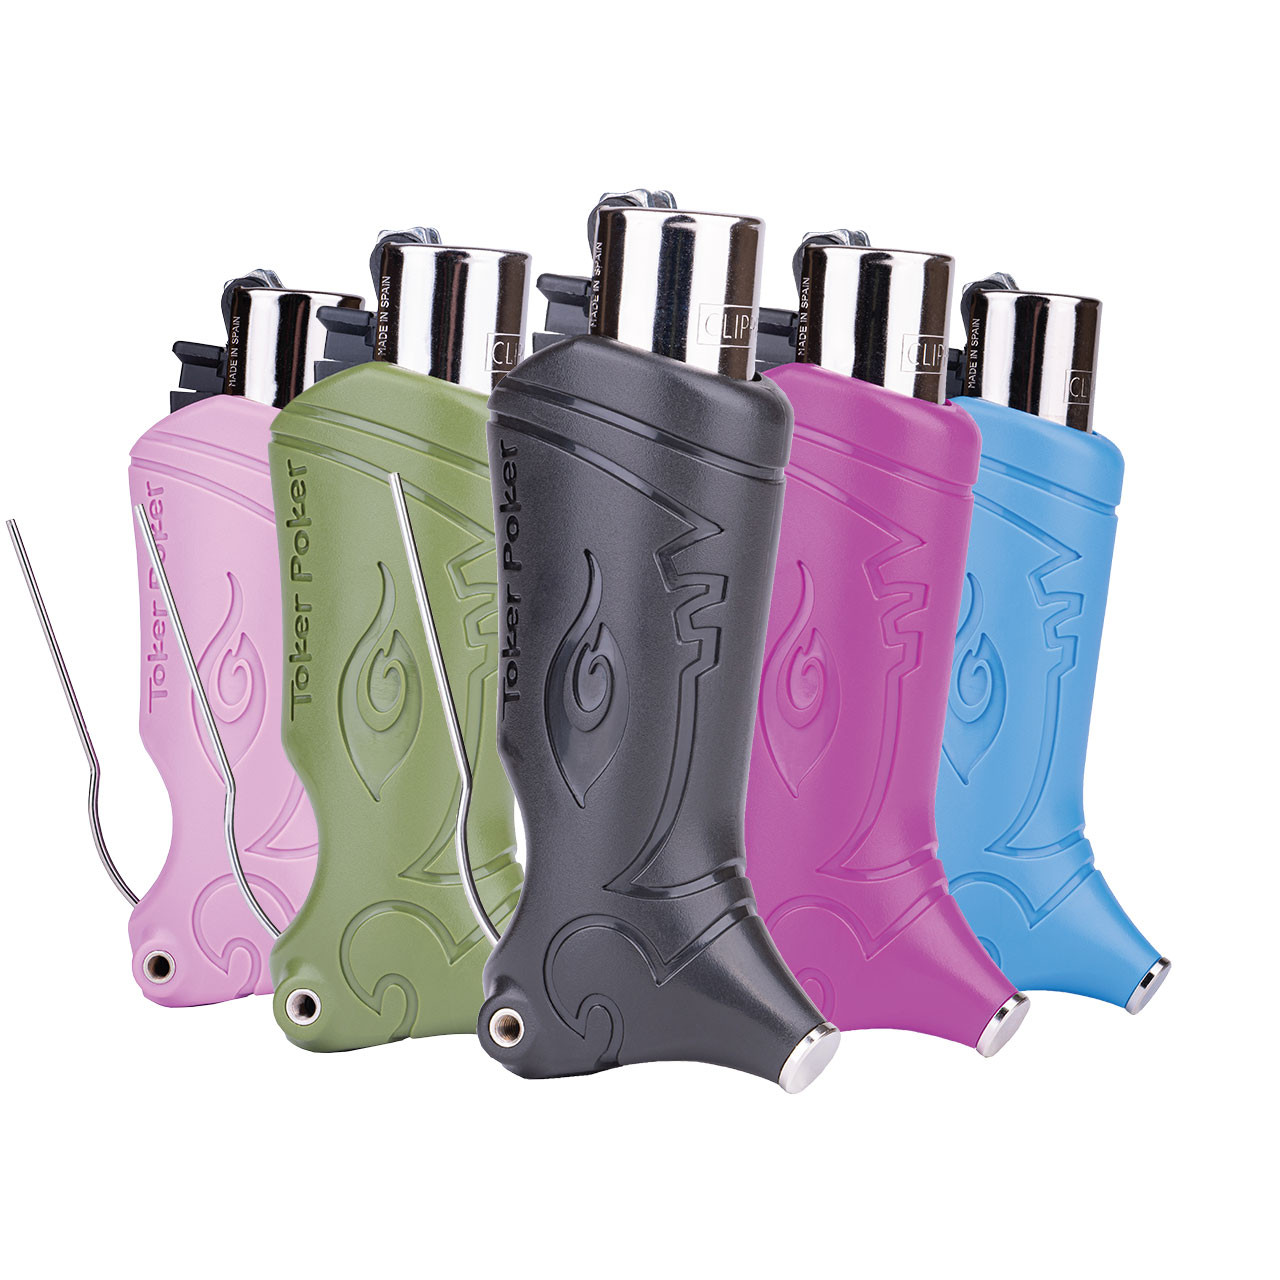 Toker Poker Clipper Lighter Sleeve, Assorted Colors - Waterbeds 'n' Stuff